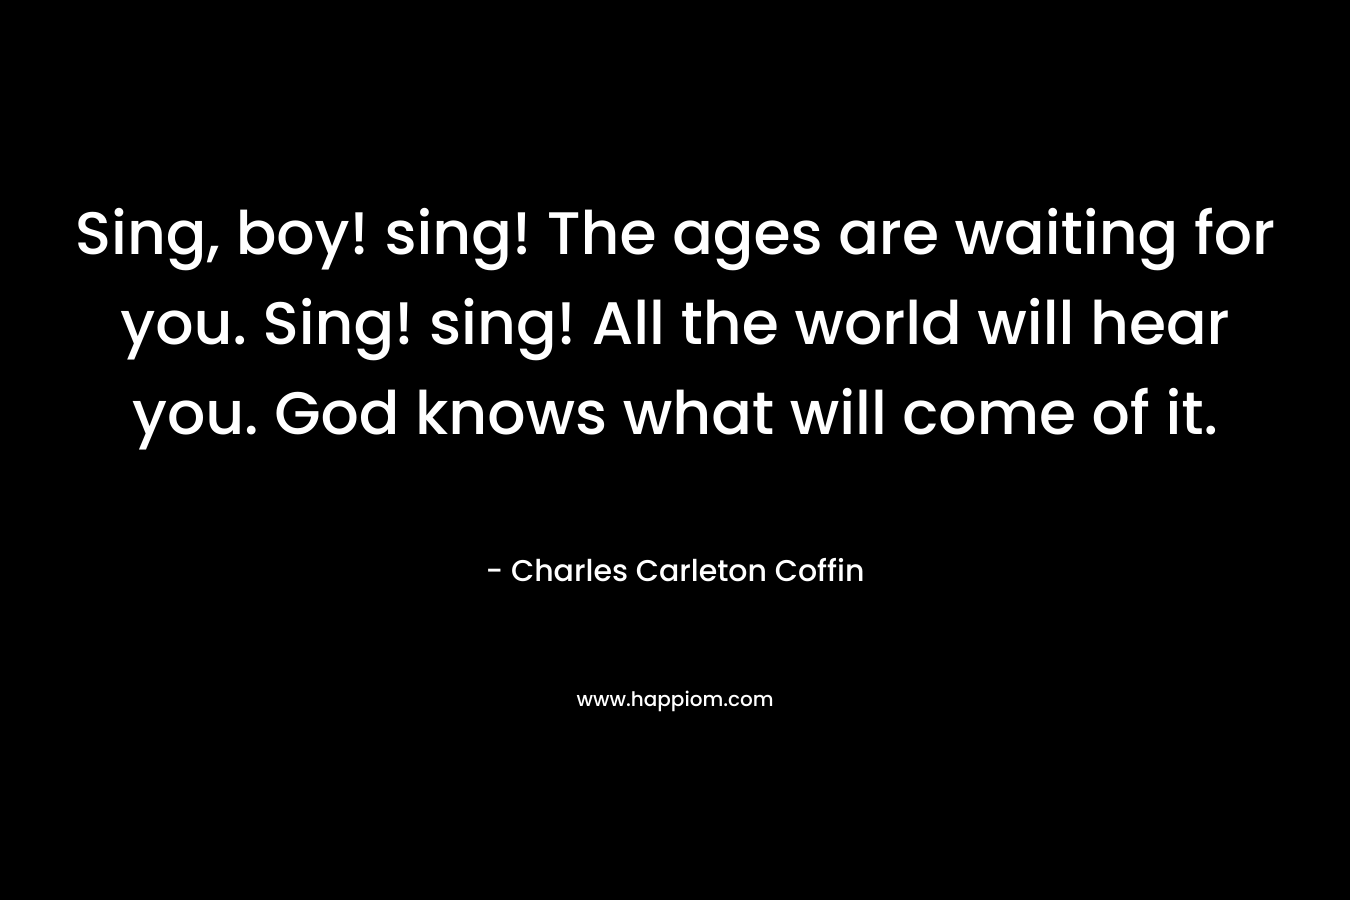 Sing, boy! sing! The ages are waiting for you. Sing! sing! All the world will hear you. God knows what will come of it.